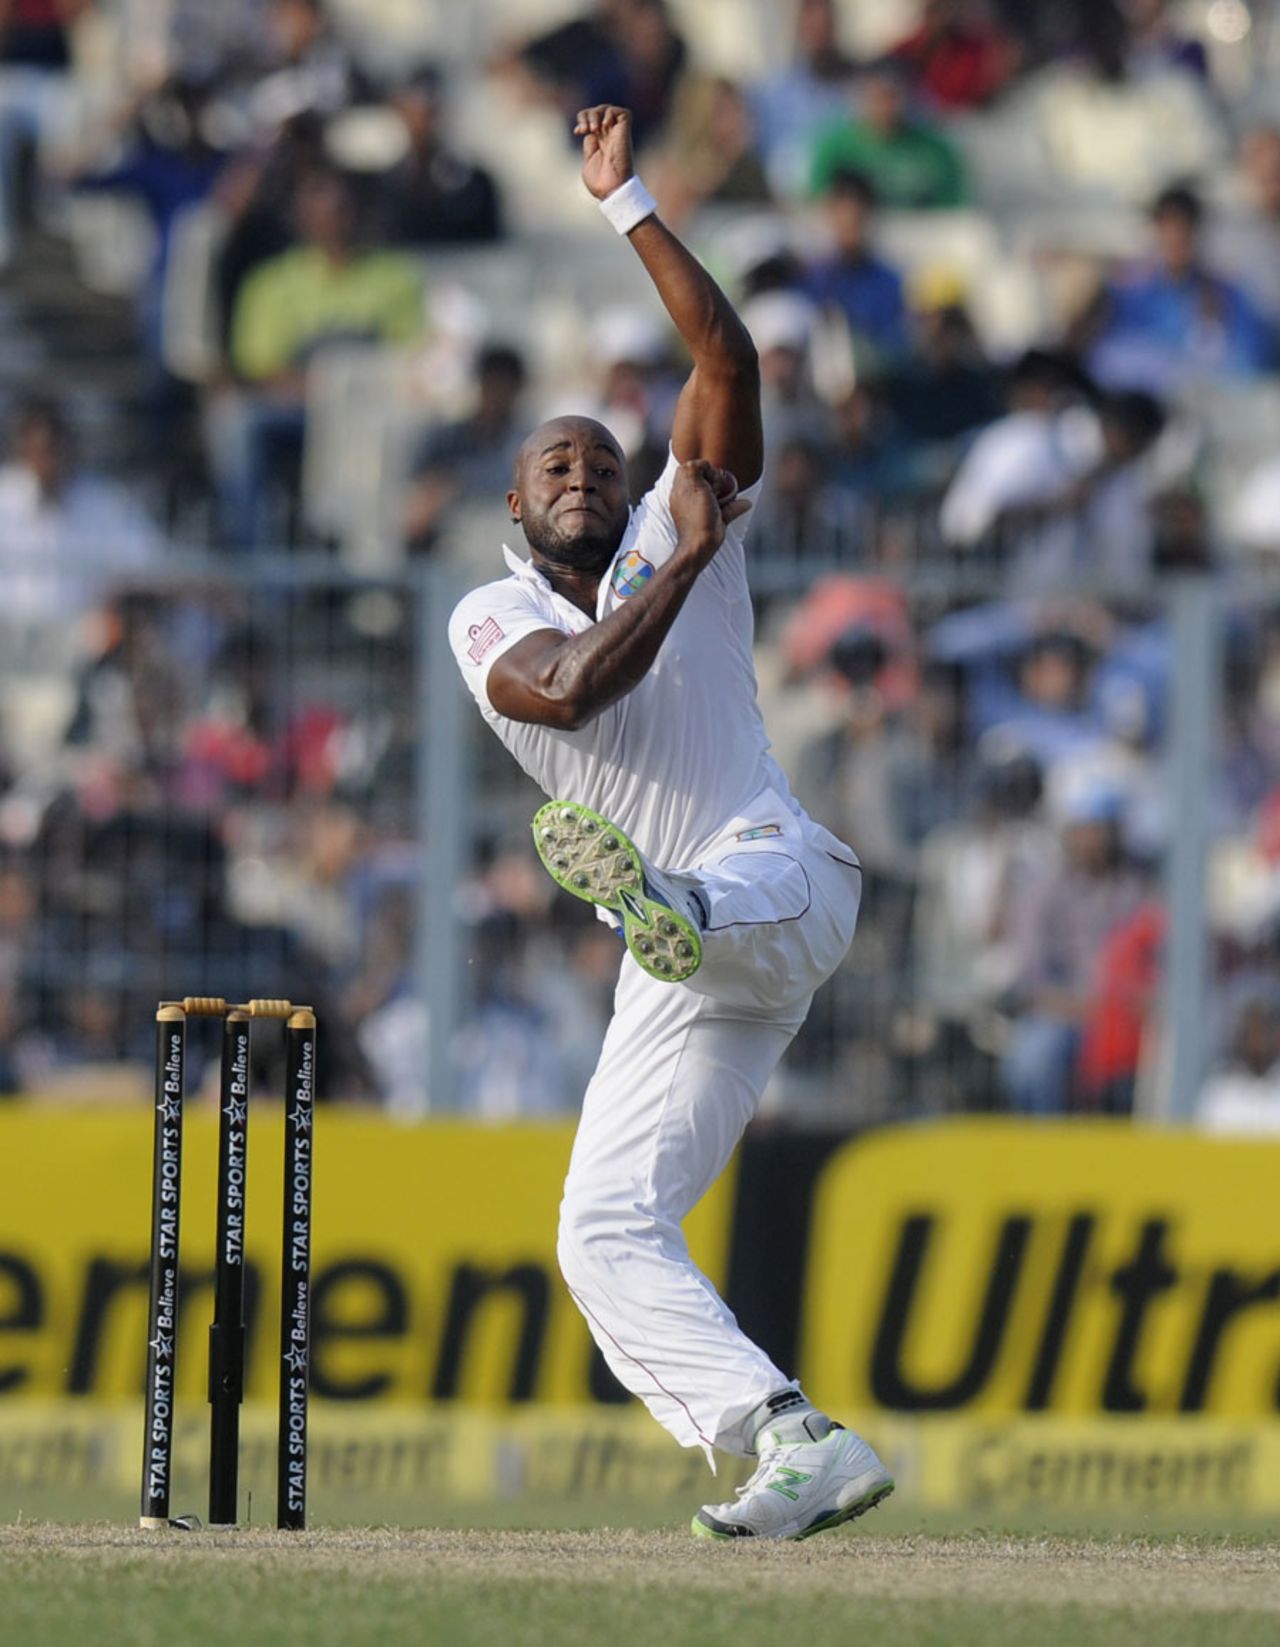 Tino Best in his unconventional delivery stride, India v West Indies, 1st Test, Kolkata, 1st day, November 6, 2013